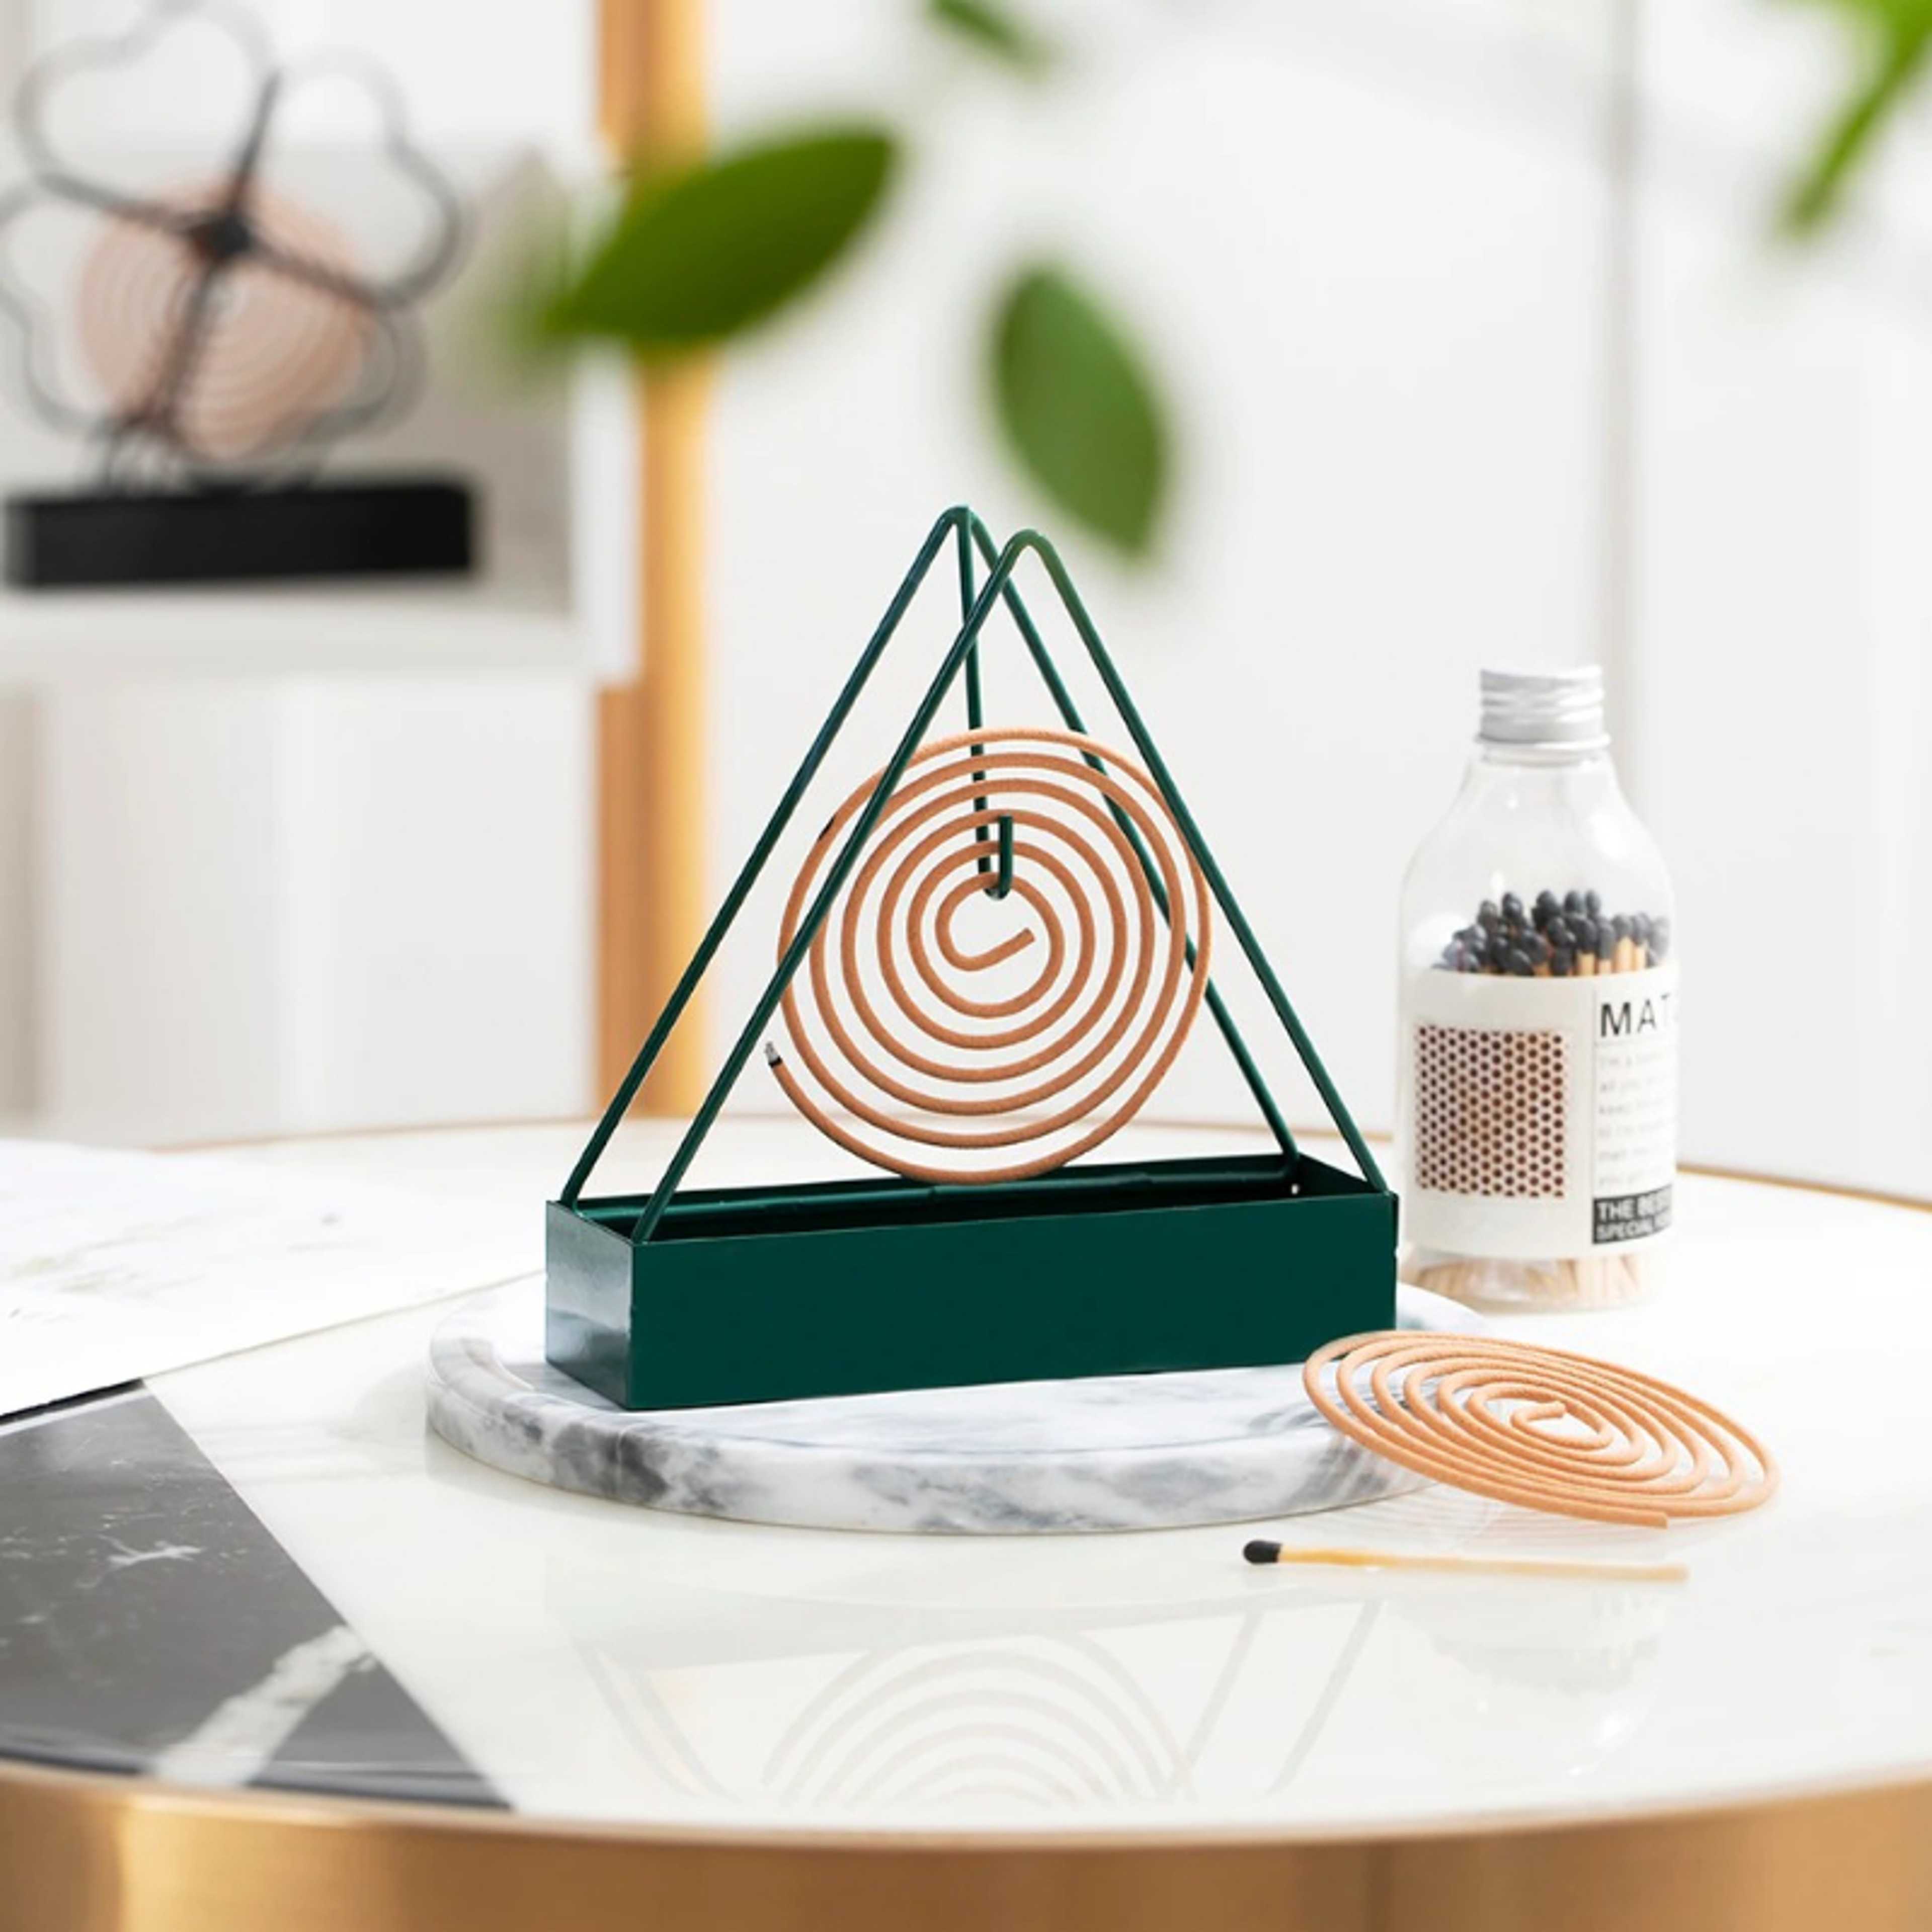 Mortein Refill Coil stand, Metal stand Rack Hook for Room Décor Wall Mounted and Mortein Coil Stand,Nordic iron insect mosquito coil holder retro innovative home incense  mosquito repellent ,Nordic Spiral Mosquito Coil Holder Iron Art Mosquito Coil Frame